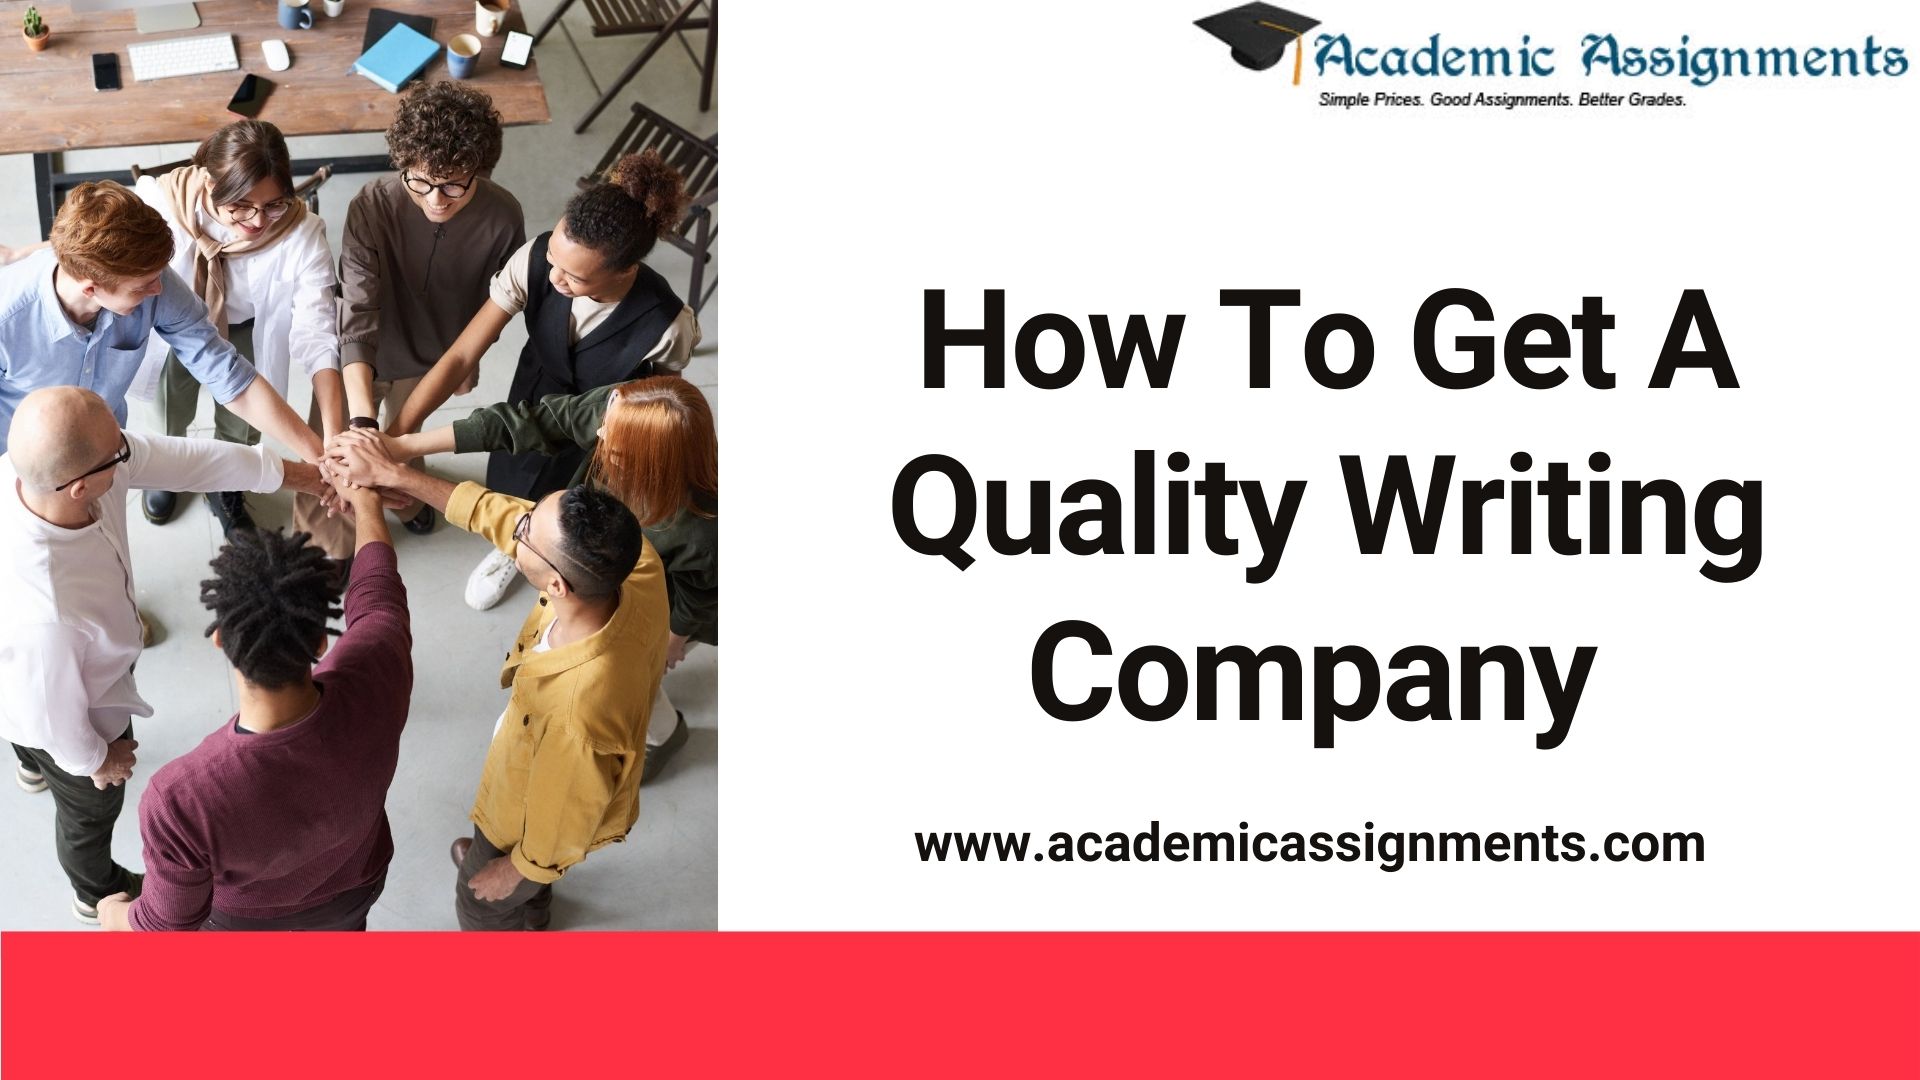 How To Get A Quality Writing Company